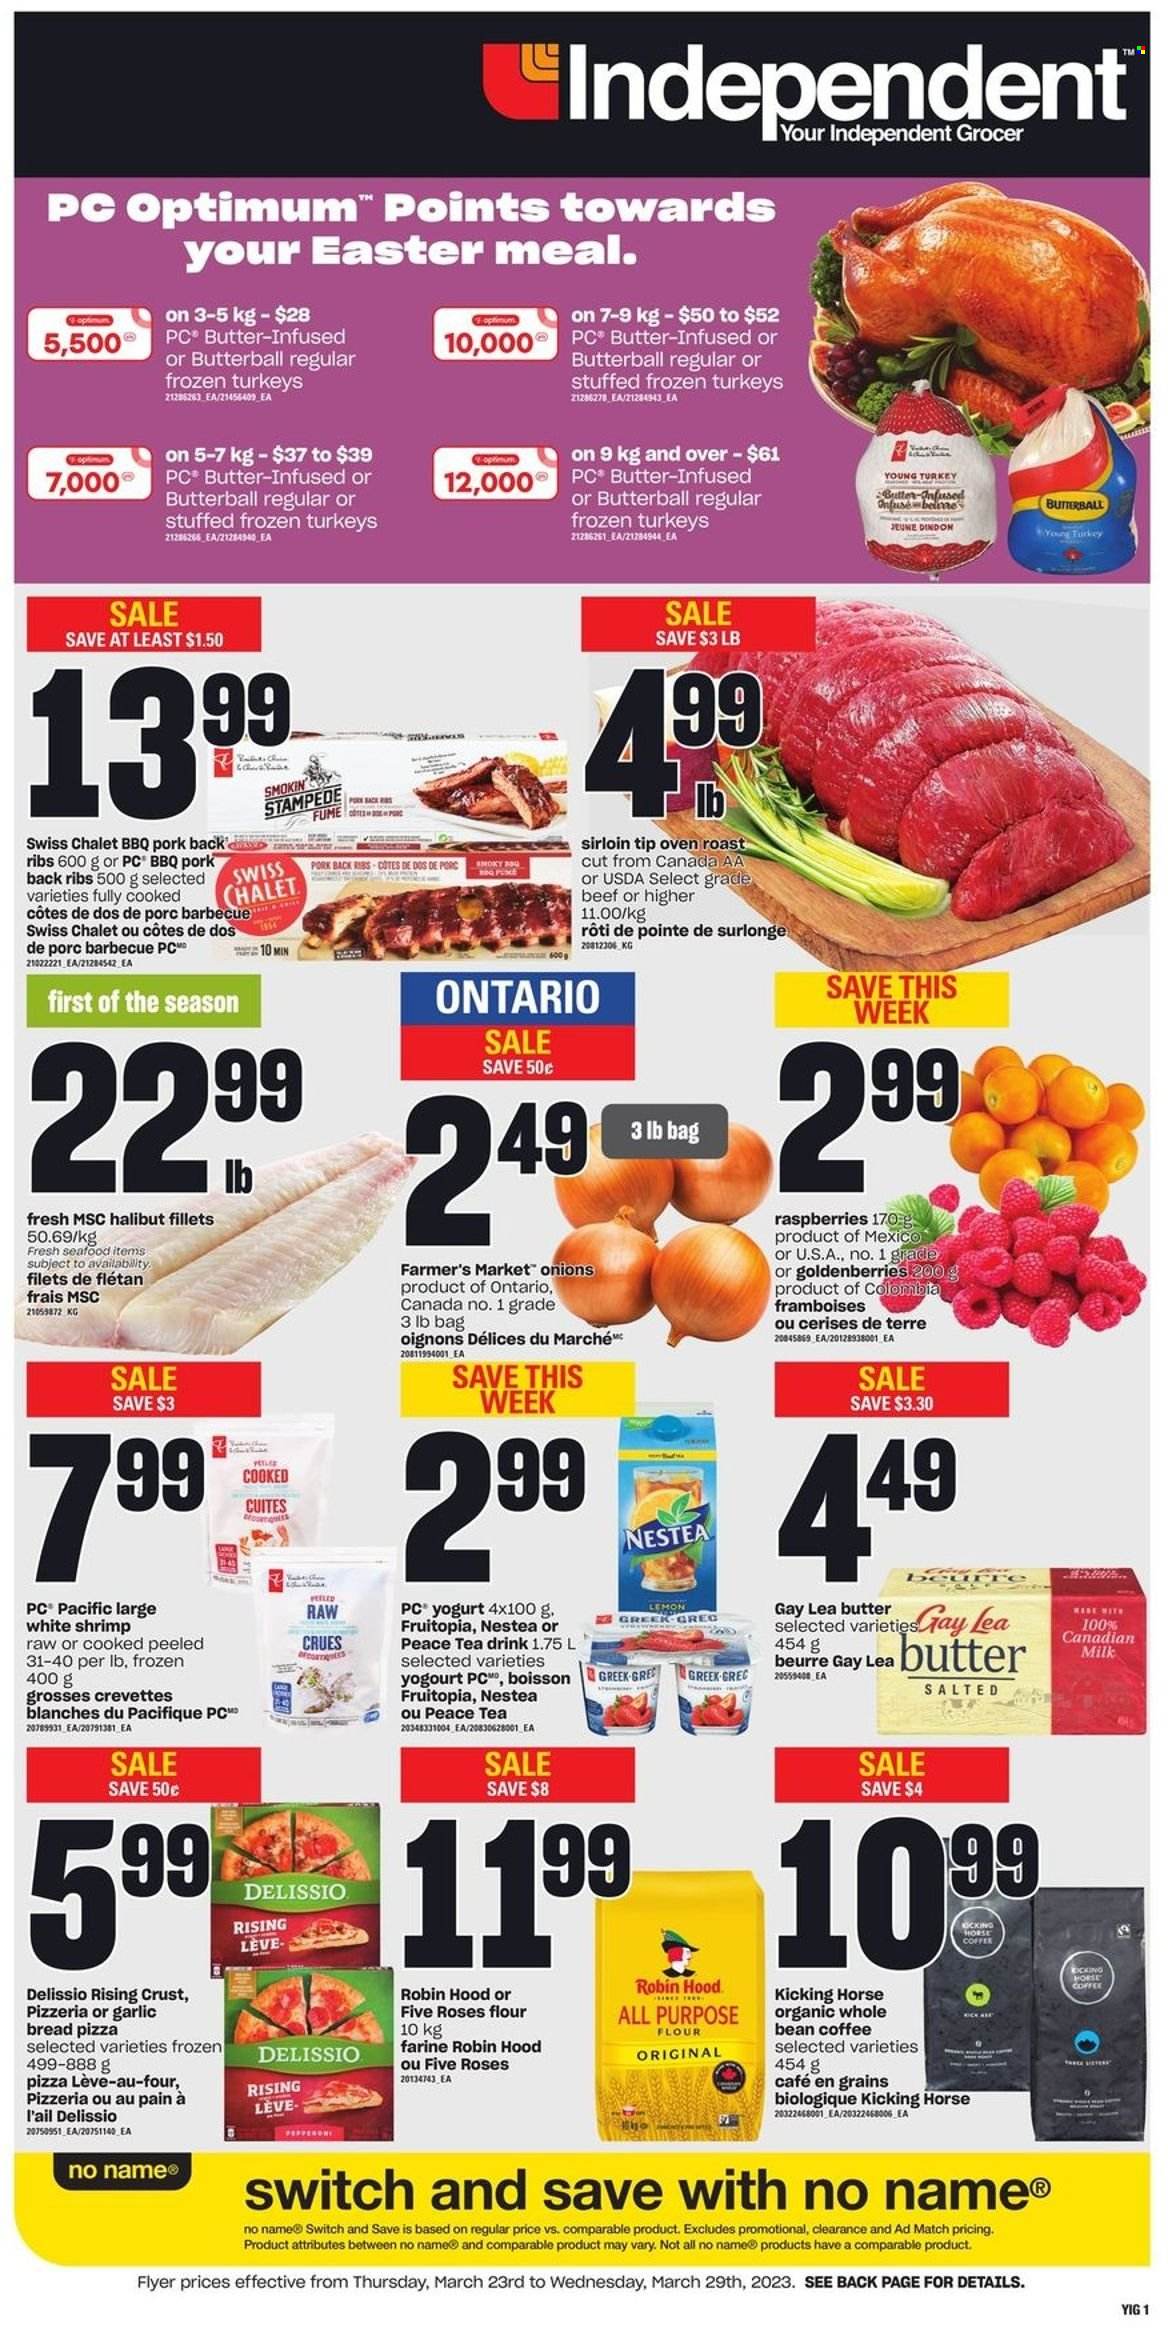 thumbnail - Independent Flyer - March 23, 2023 - March 29, 2023 - Sales products - bread, onion, halibut, seafood, shrimps, No Name, pizza, roast, Butterball, pepperoni, yoghurt, milk, all purpose flour, flour, tea, coffee, turkey, ribs, pork meat, pork ribs, pork back ribs, Optimum. Page 1.